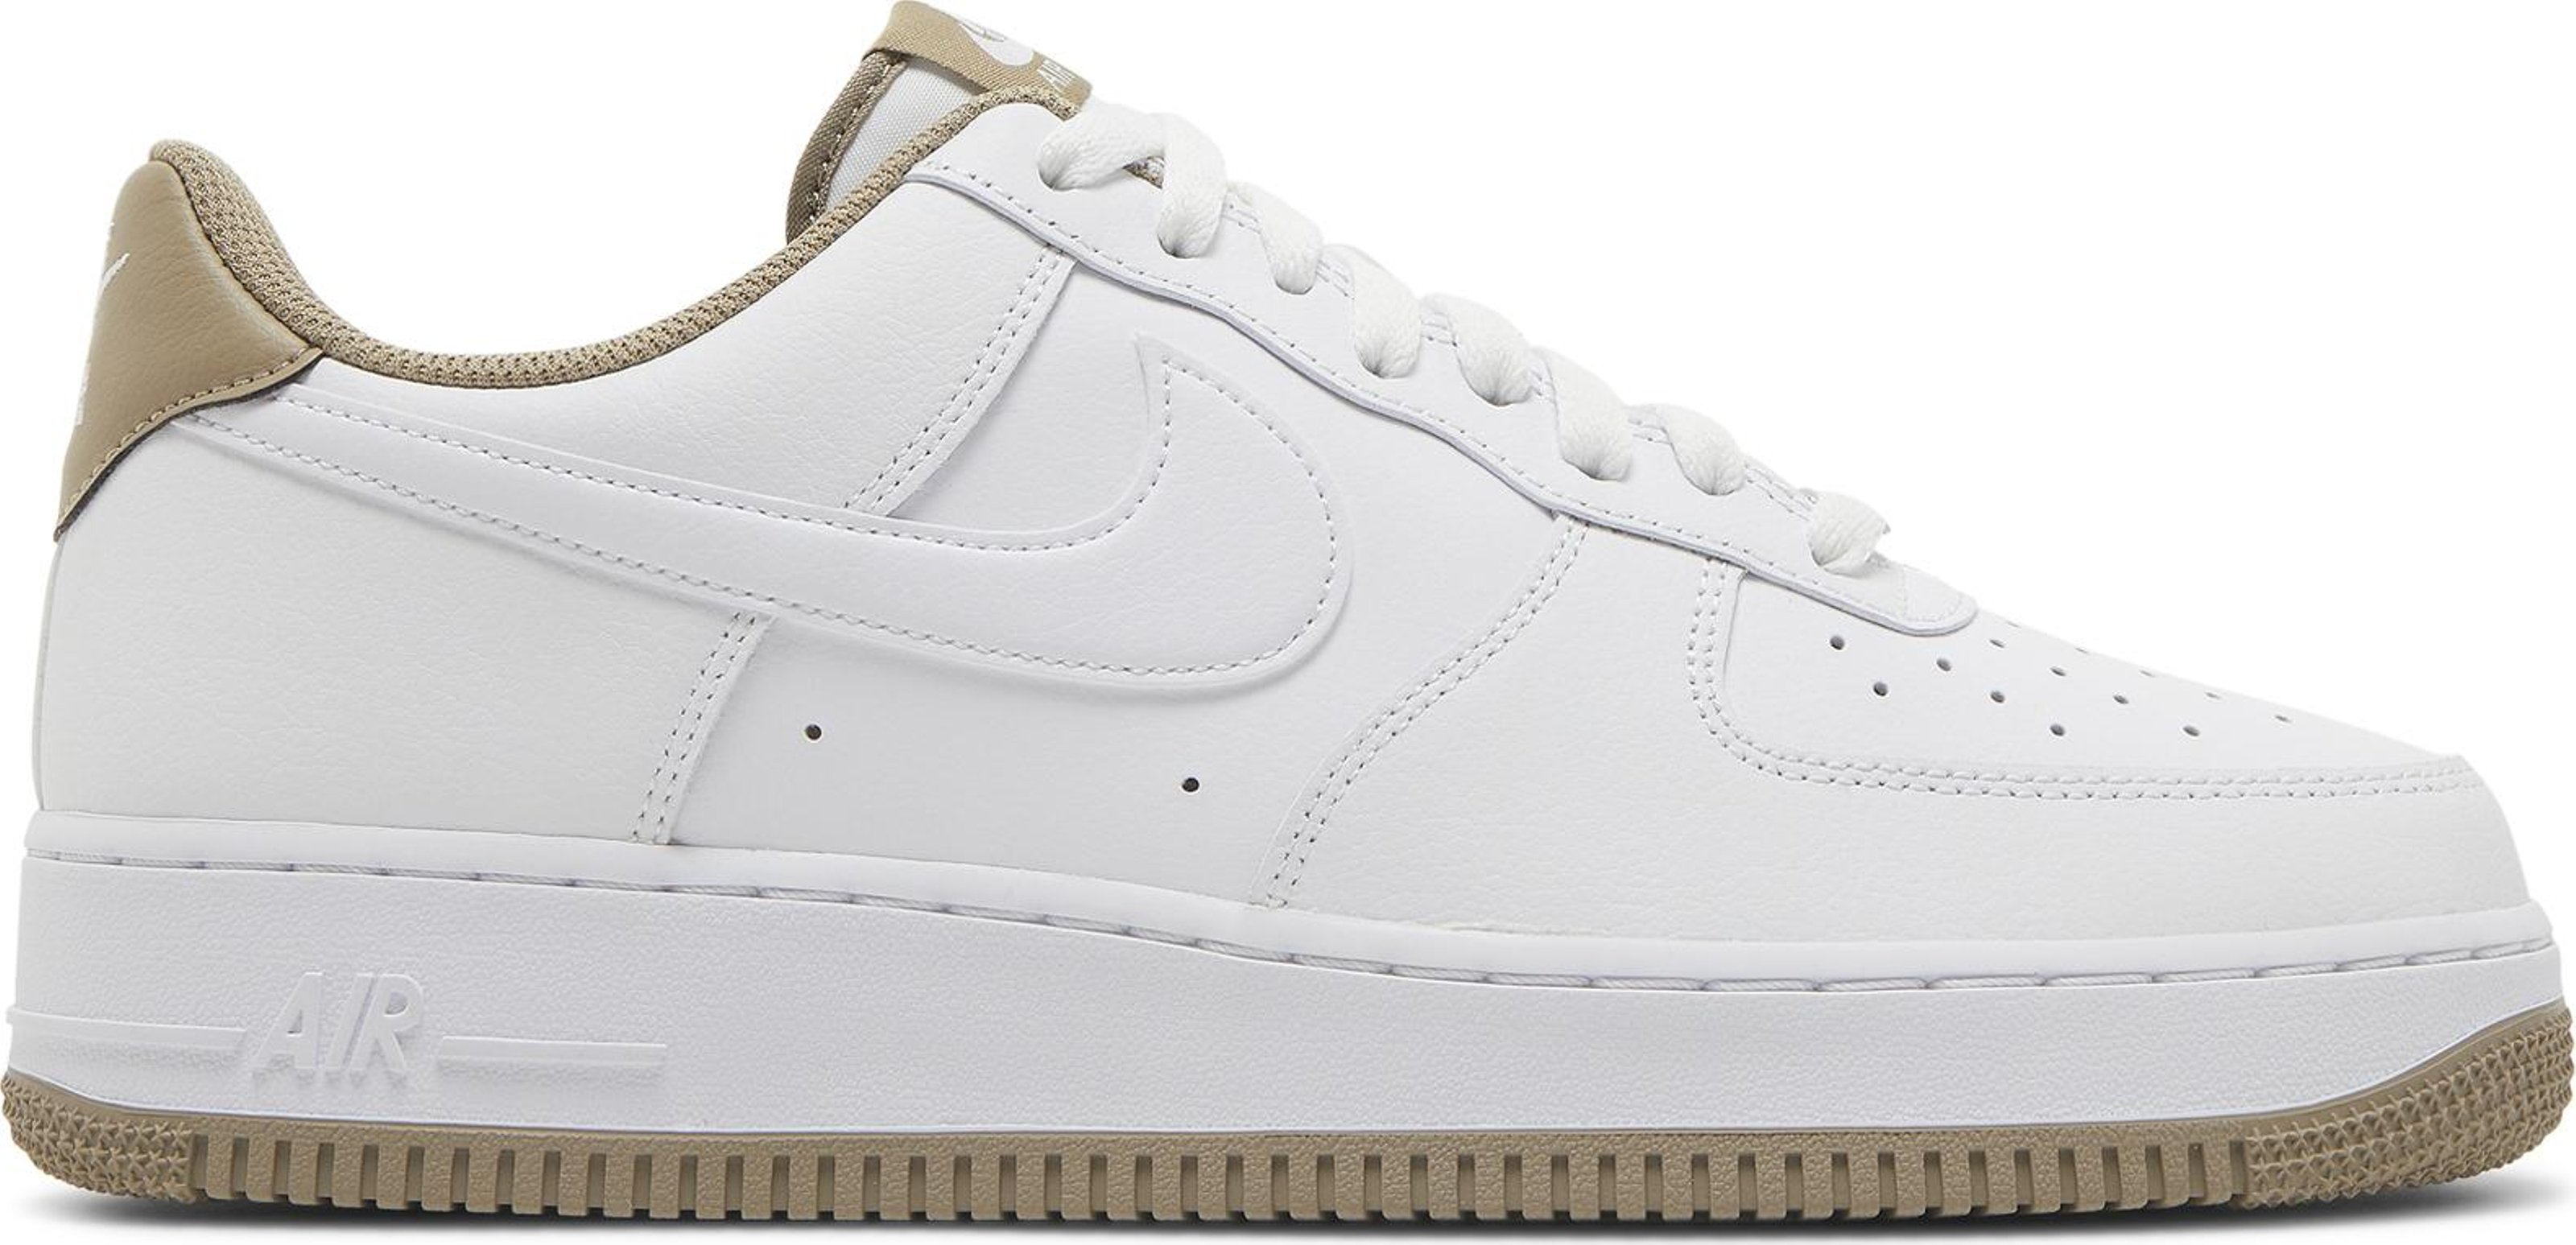 Buy Air Force 1 '07 LV8 'White Taupe' - DR9867 100 | GOAT